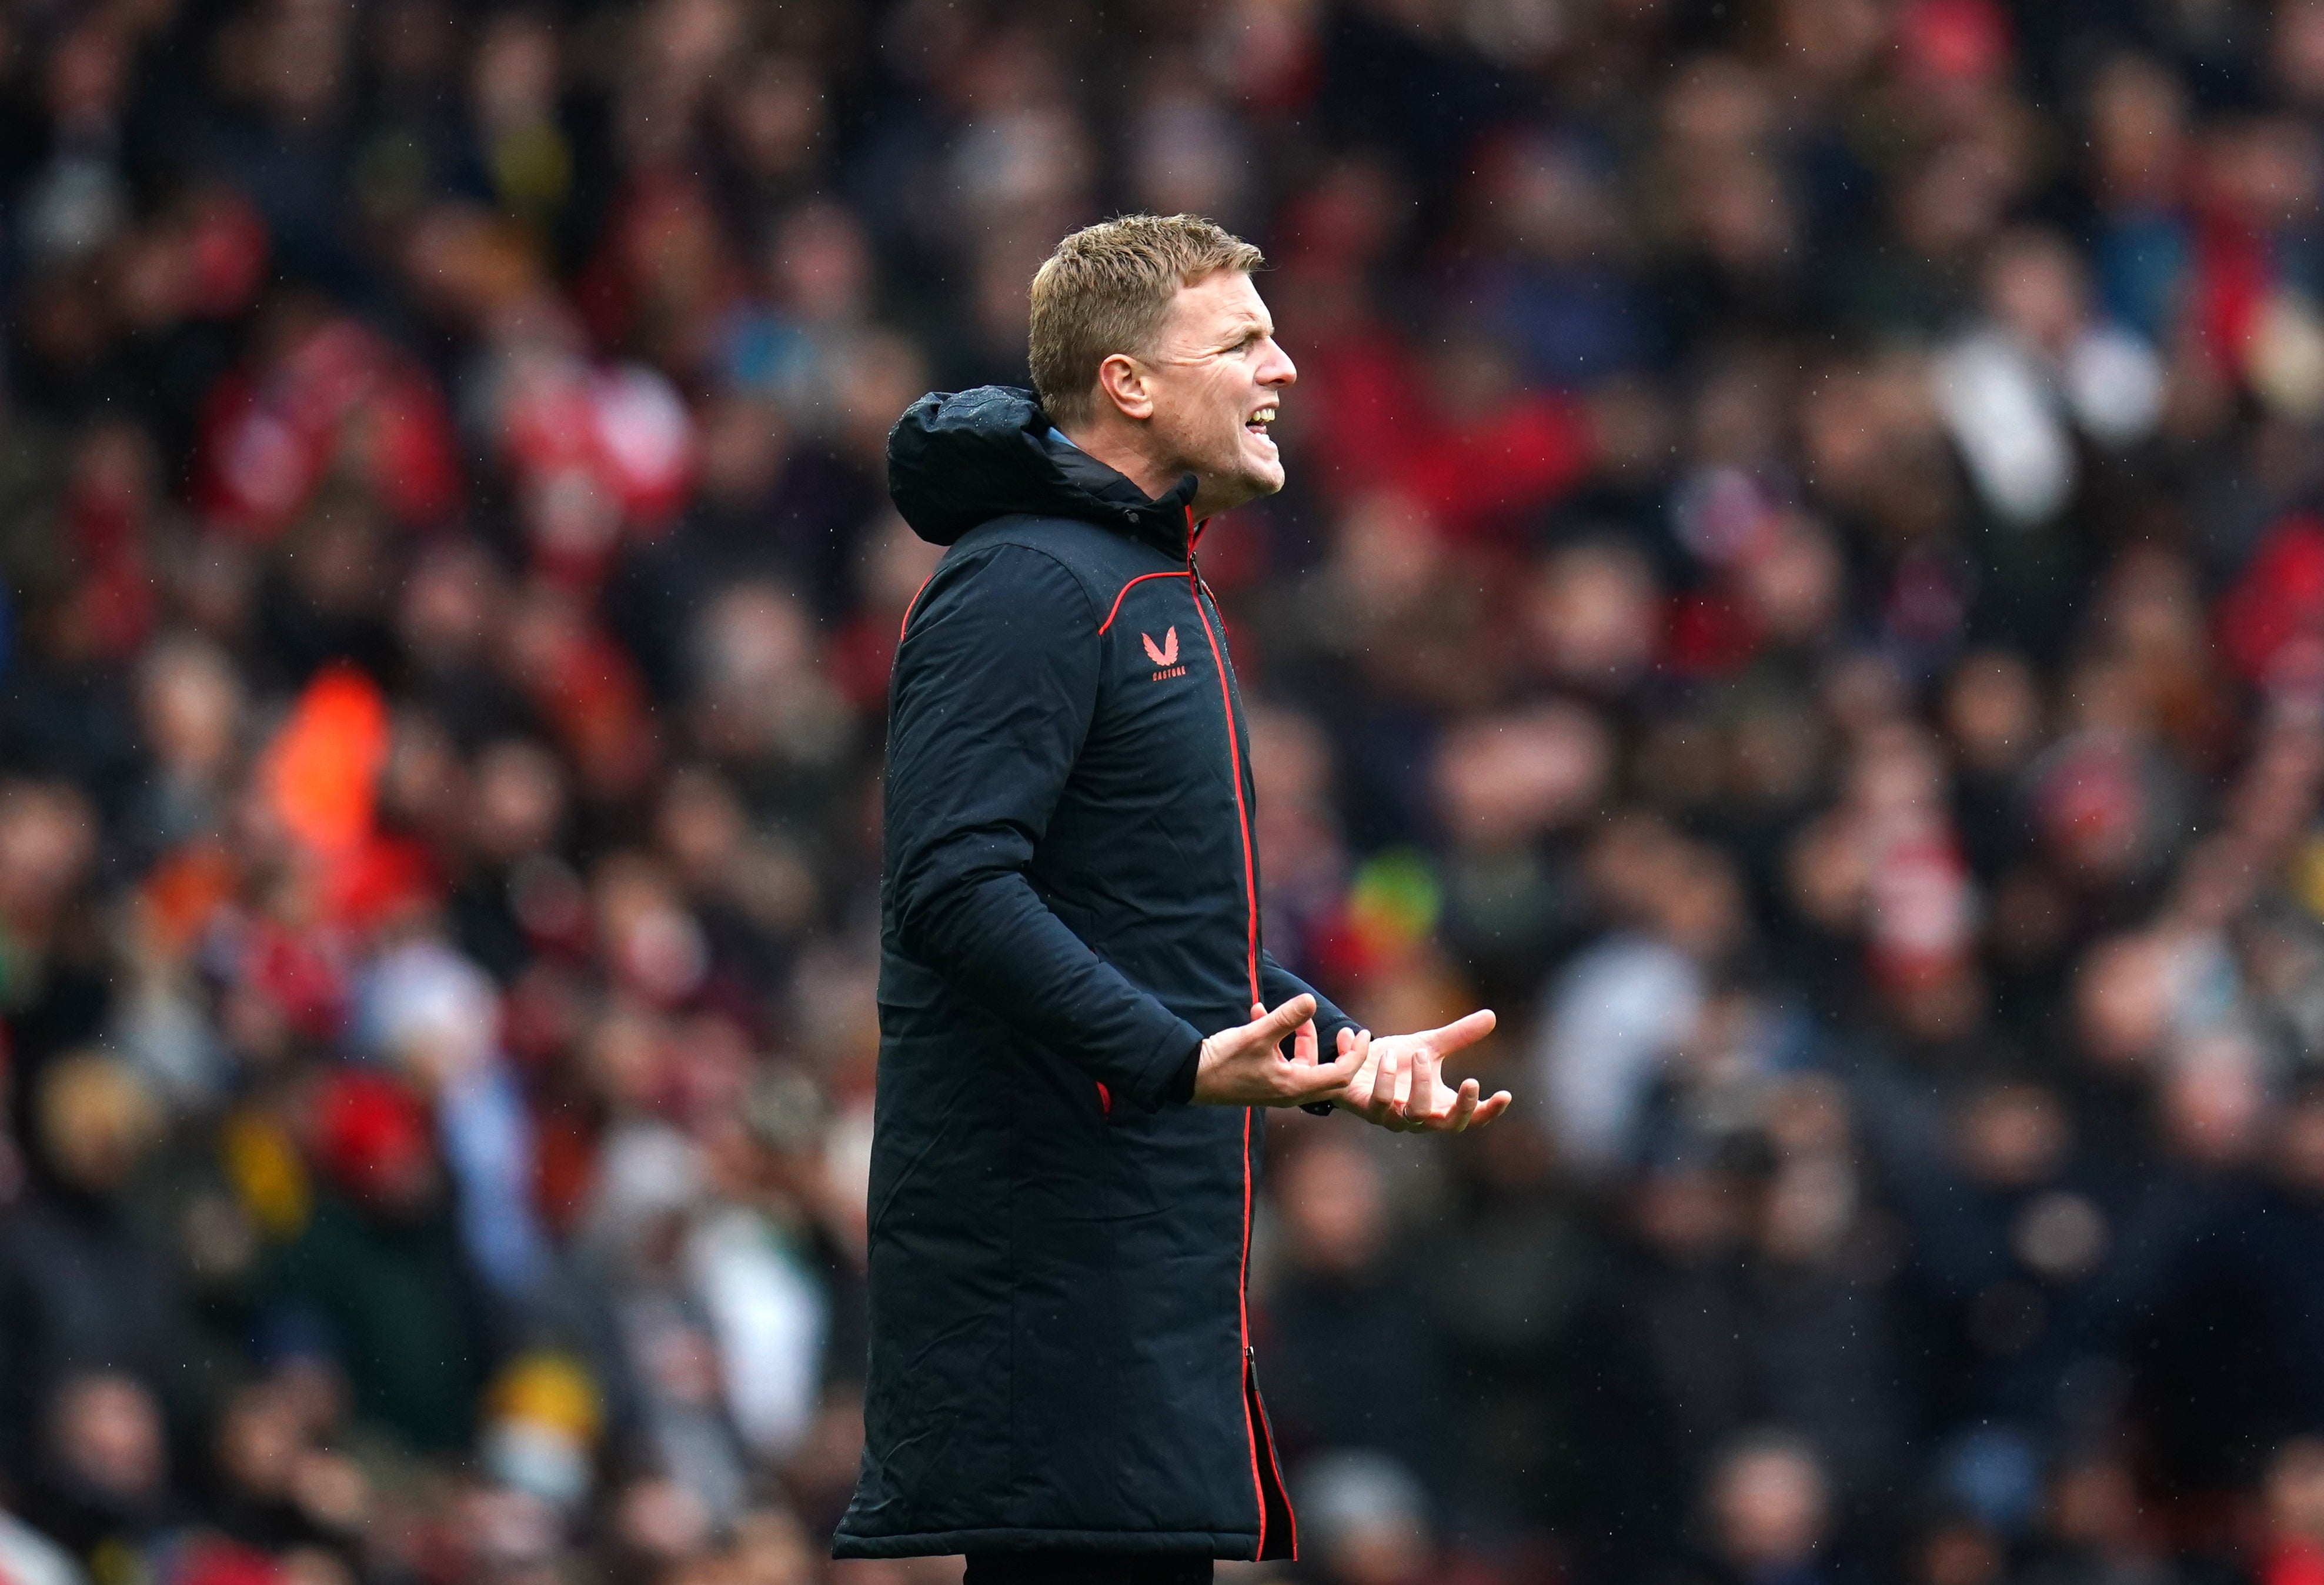 At the other end of the table, Newcastle manager Eddie Howe took charge of his side for the first time on Saturday at Arsenal, where he watched them lose 2-0 (John Walton/PA)